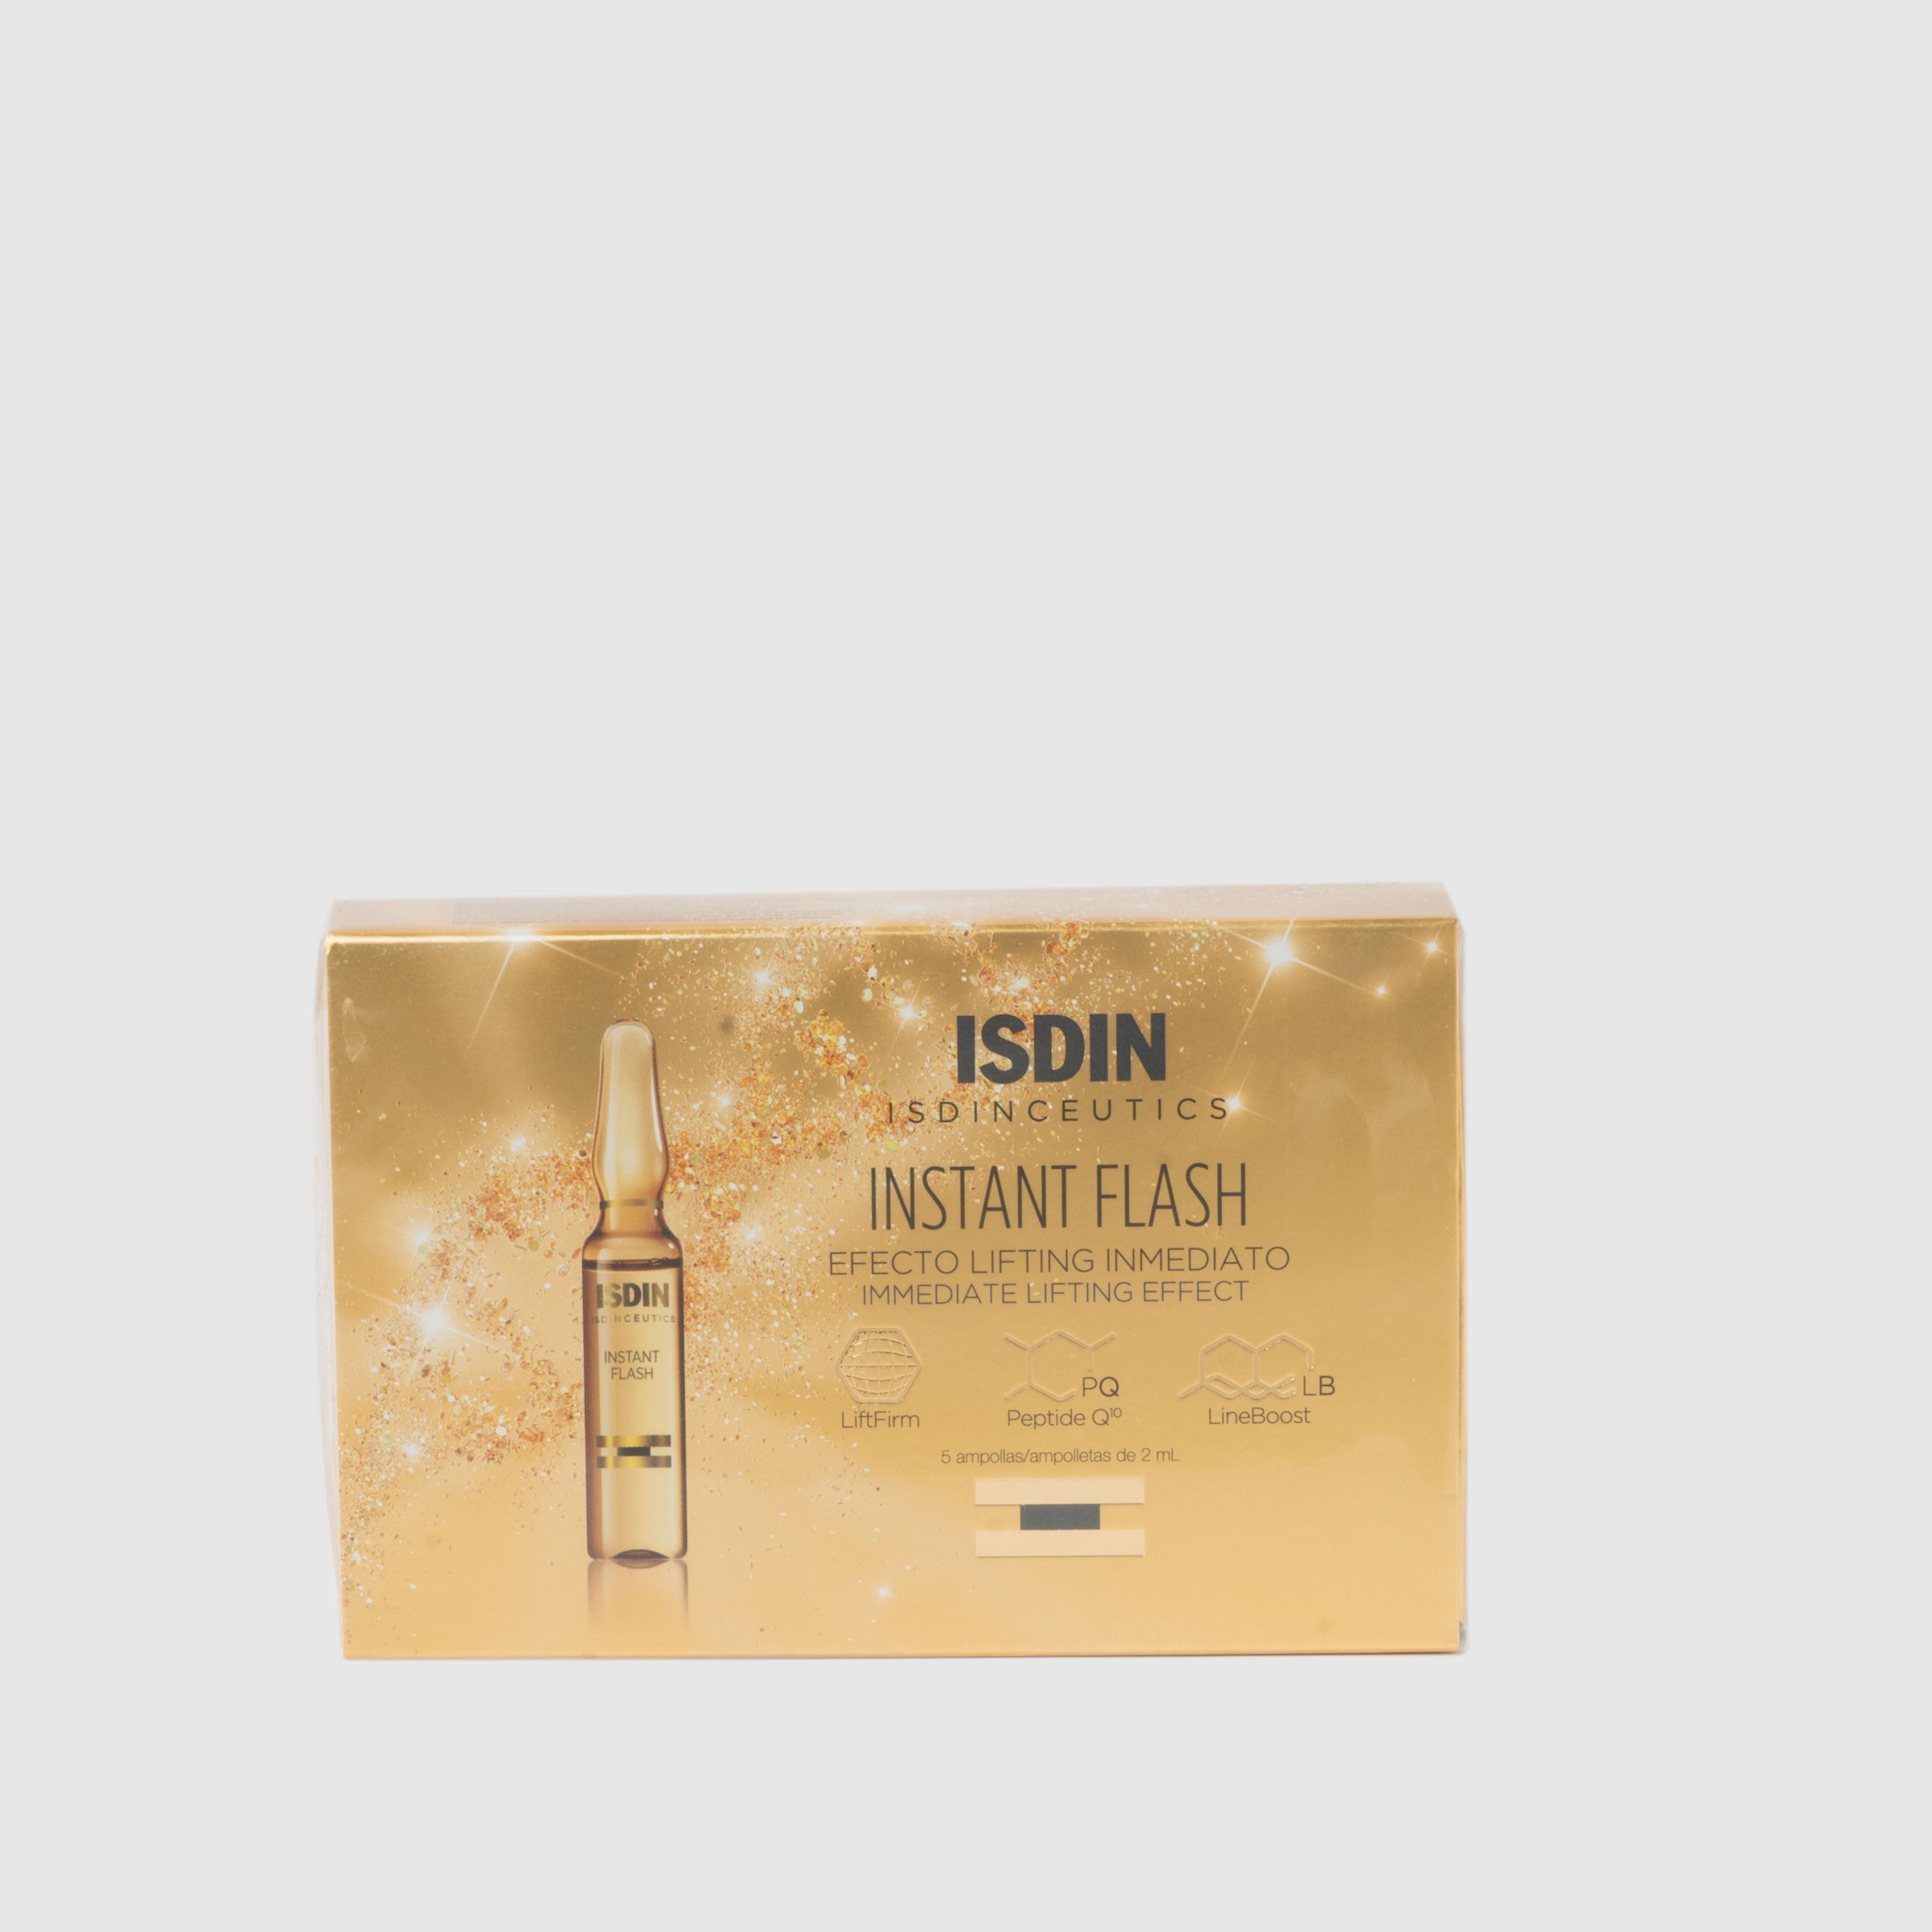 ISDIN AMPOULES INSTANT FLASH EFECTO LIFTING (5 AMPOULES) – Cremas